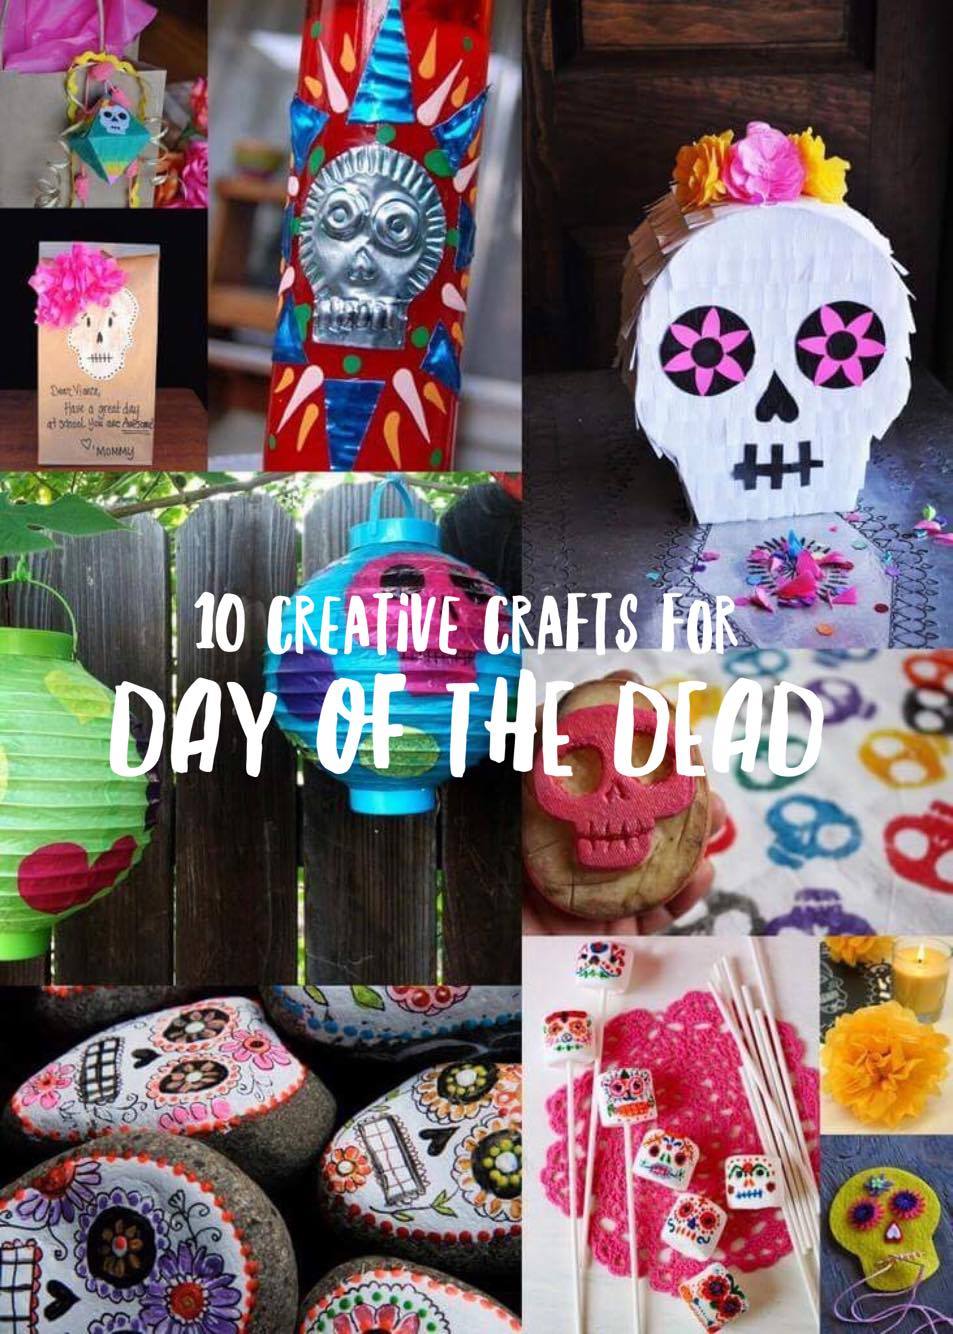 Creative Crafts for Day of the Dead | Lola's Cocina | www.lolascocina.com